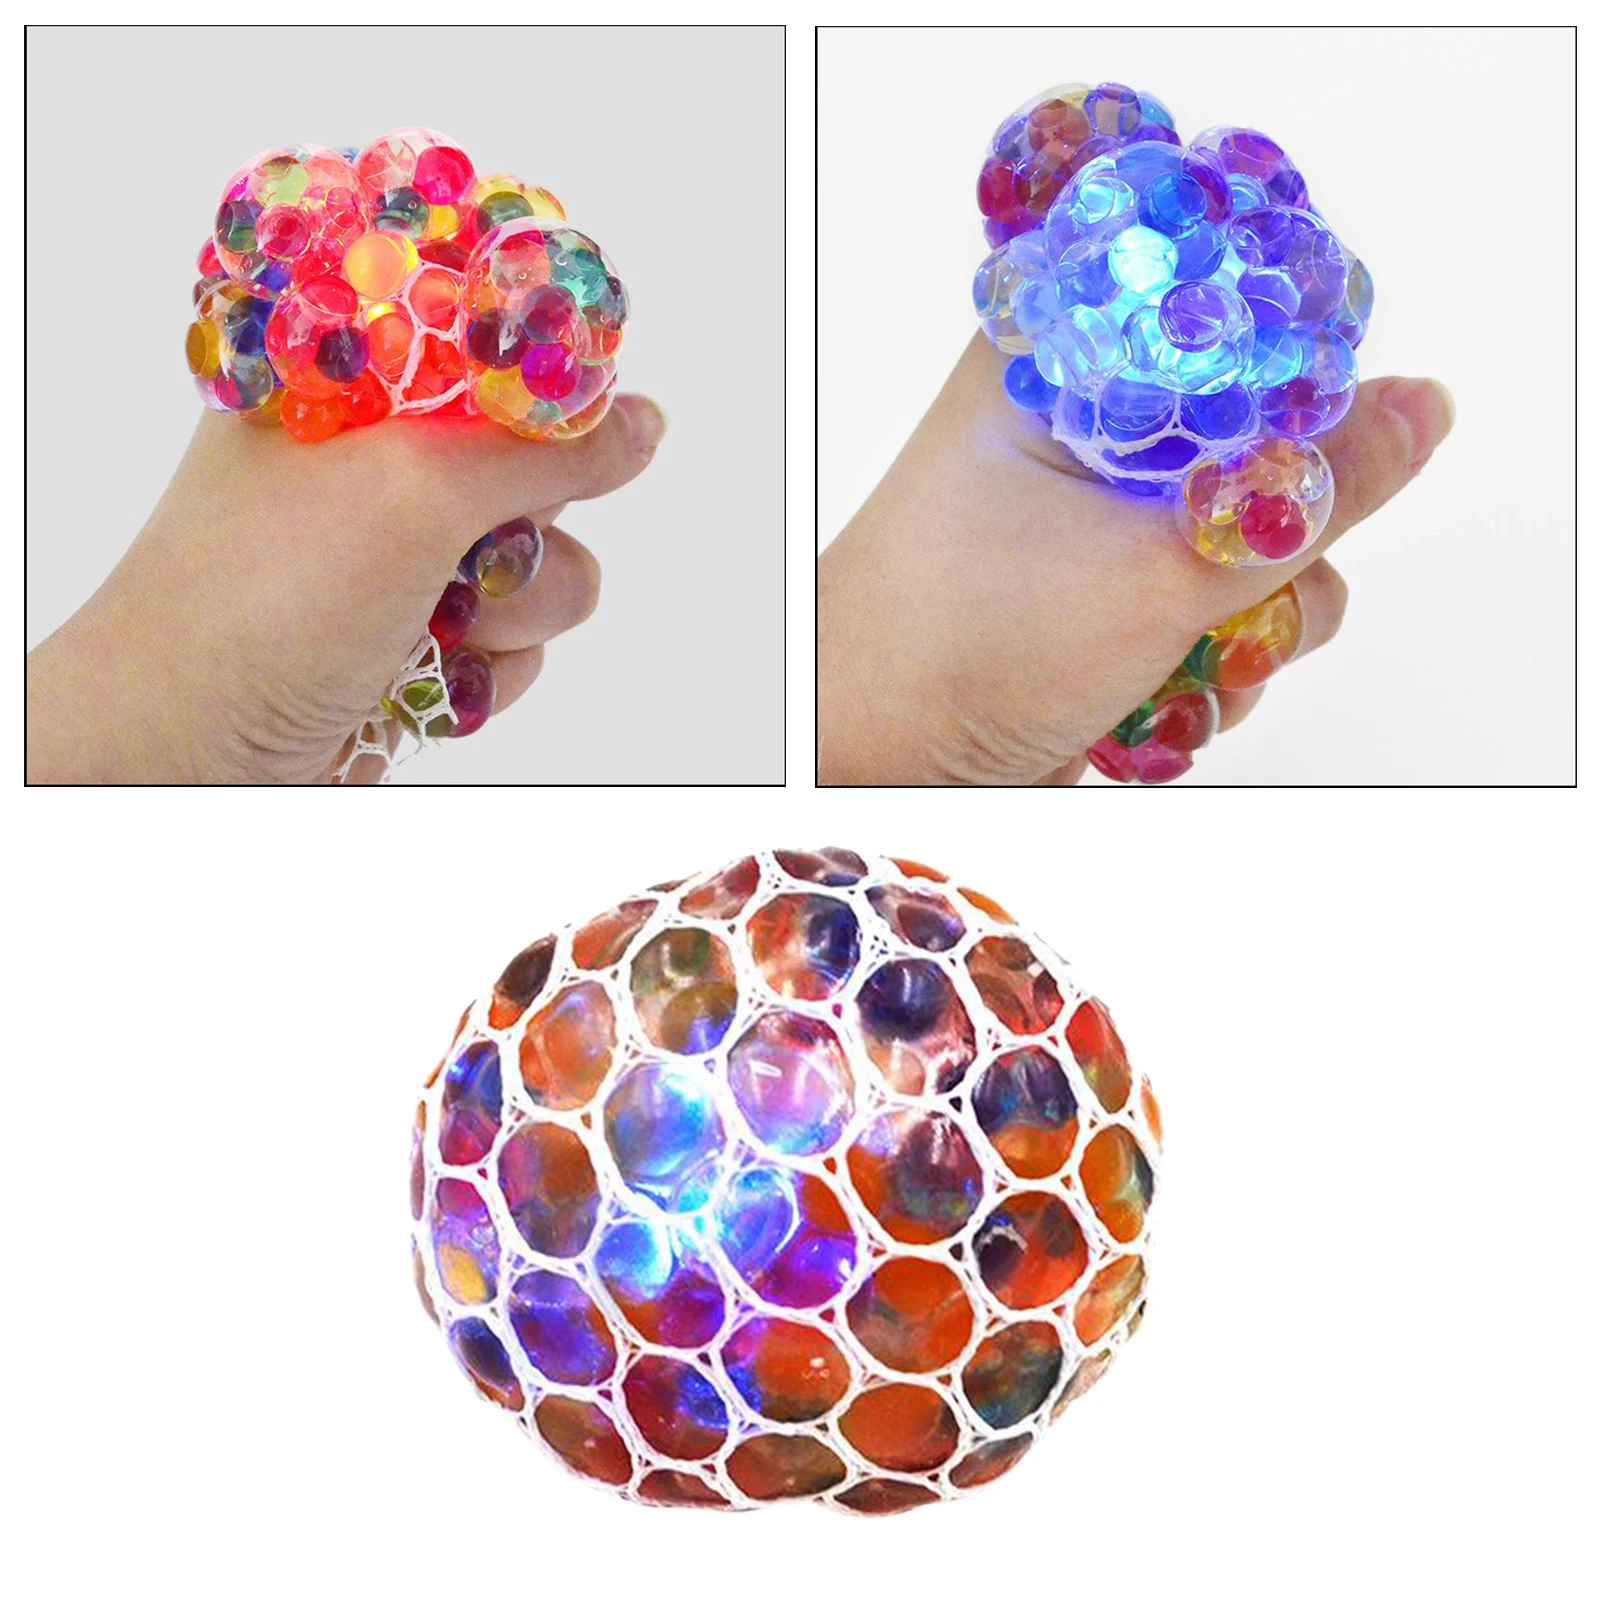 Mesh Squeezing Grape Balls Stress LED Glitter Toys Stress Relief Ball Light Up Squishy Toys mochi's fidget toys